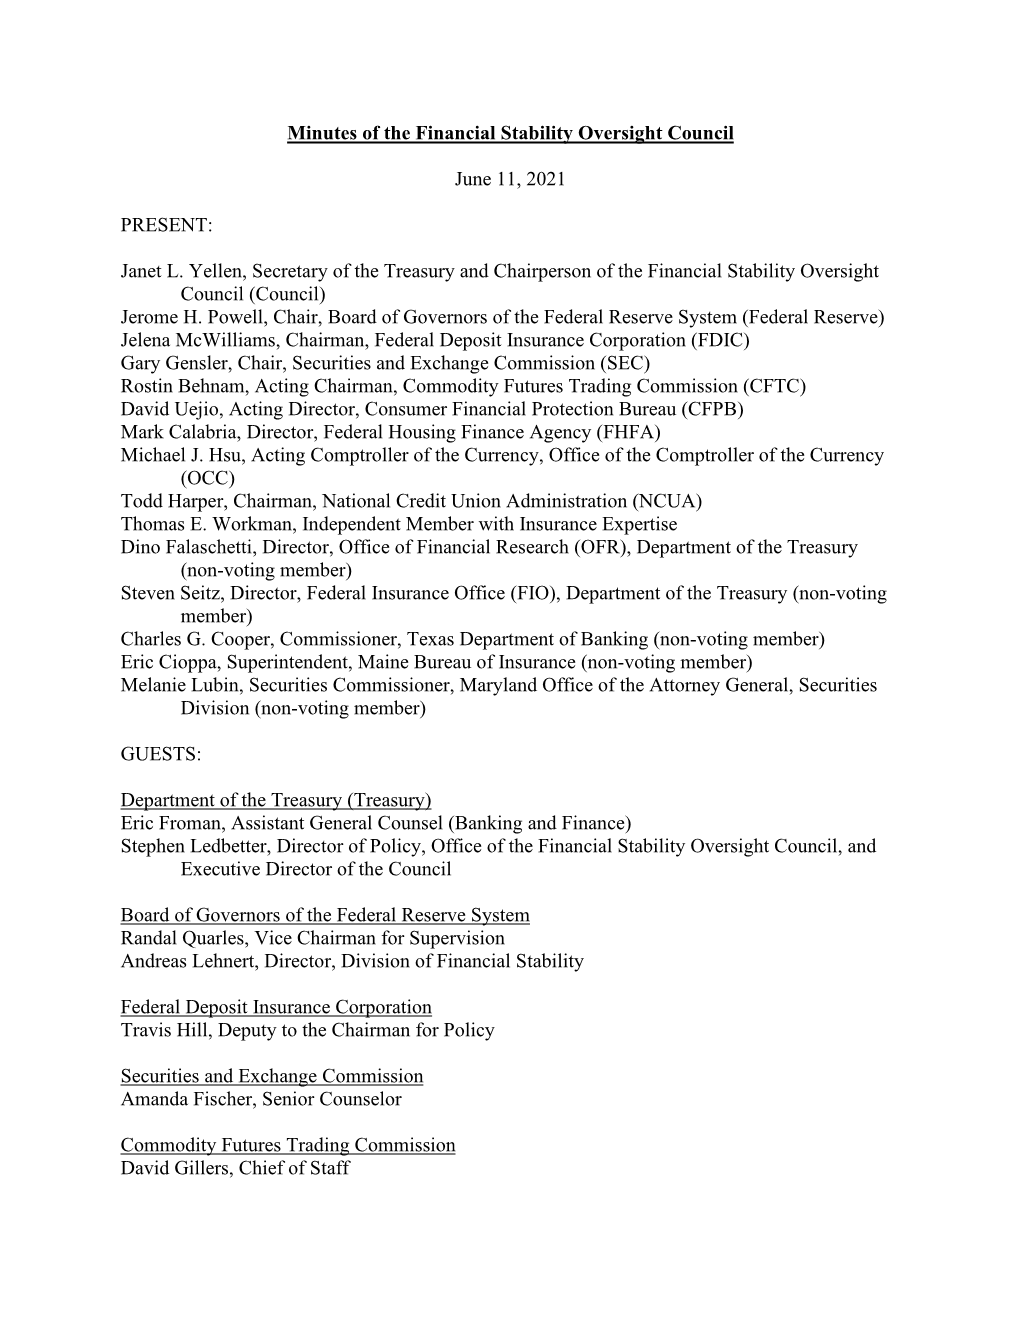 Minutes of the Financial Stability Oversight Council June